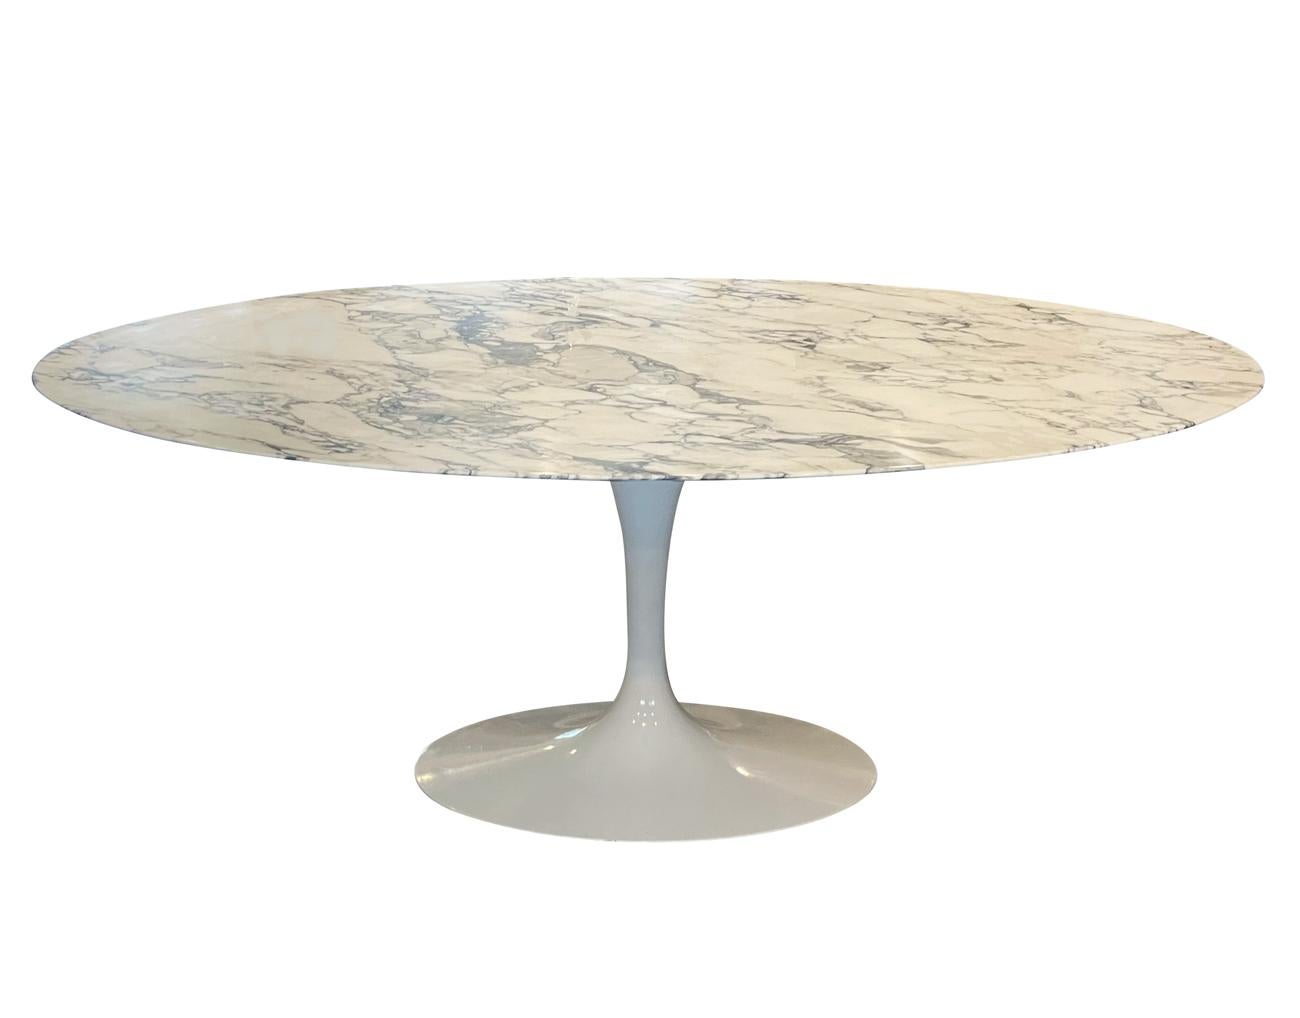 American Mid-Century Modern Oval Dining Table by Eero Saarinen for Knoll in White Marble